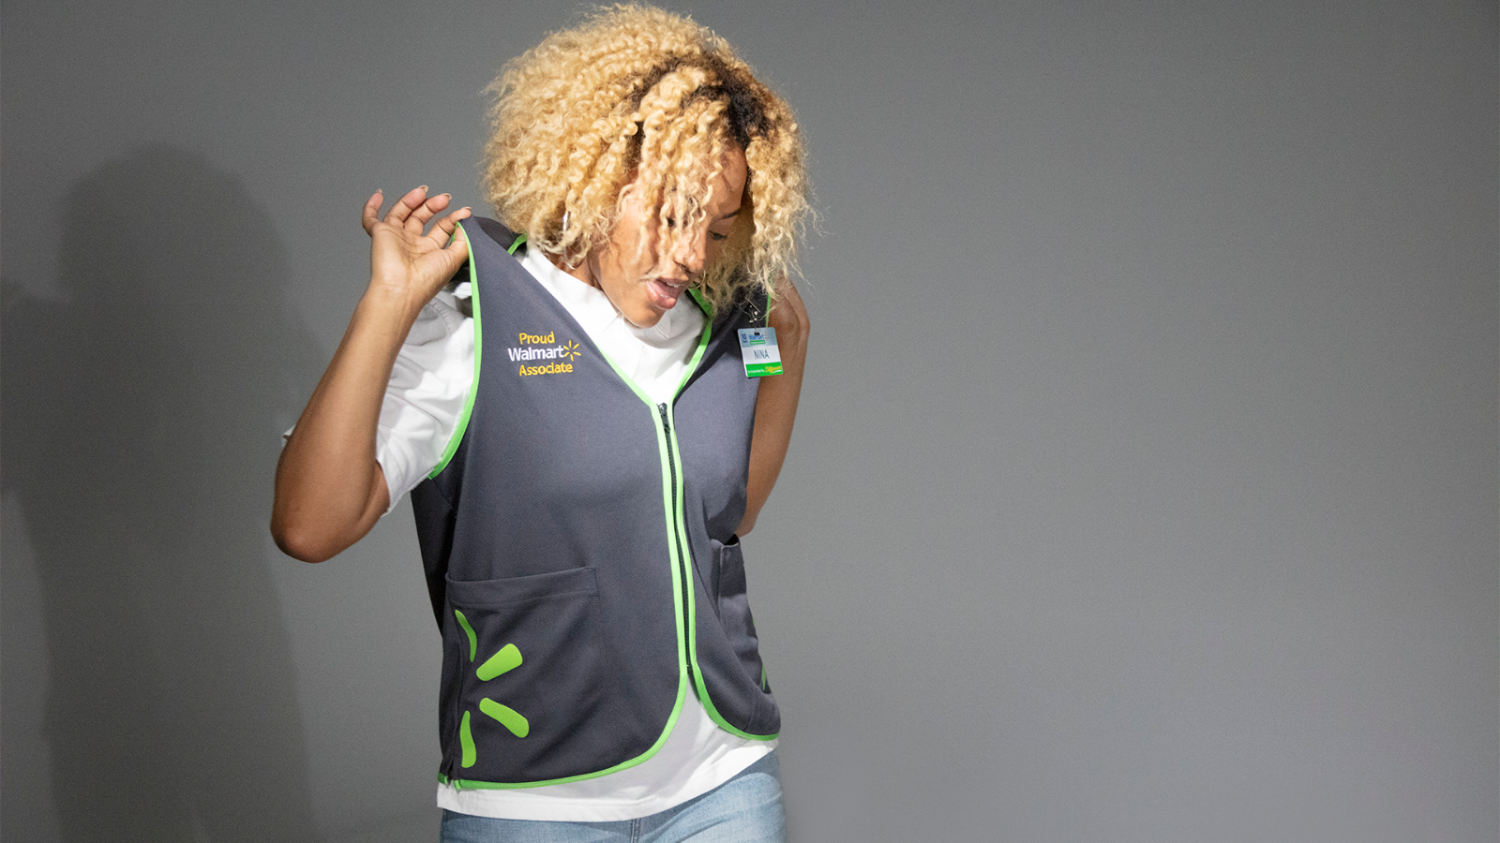 The Walmart Vest Gets an Upgrade with New Options for Associates